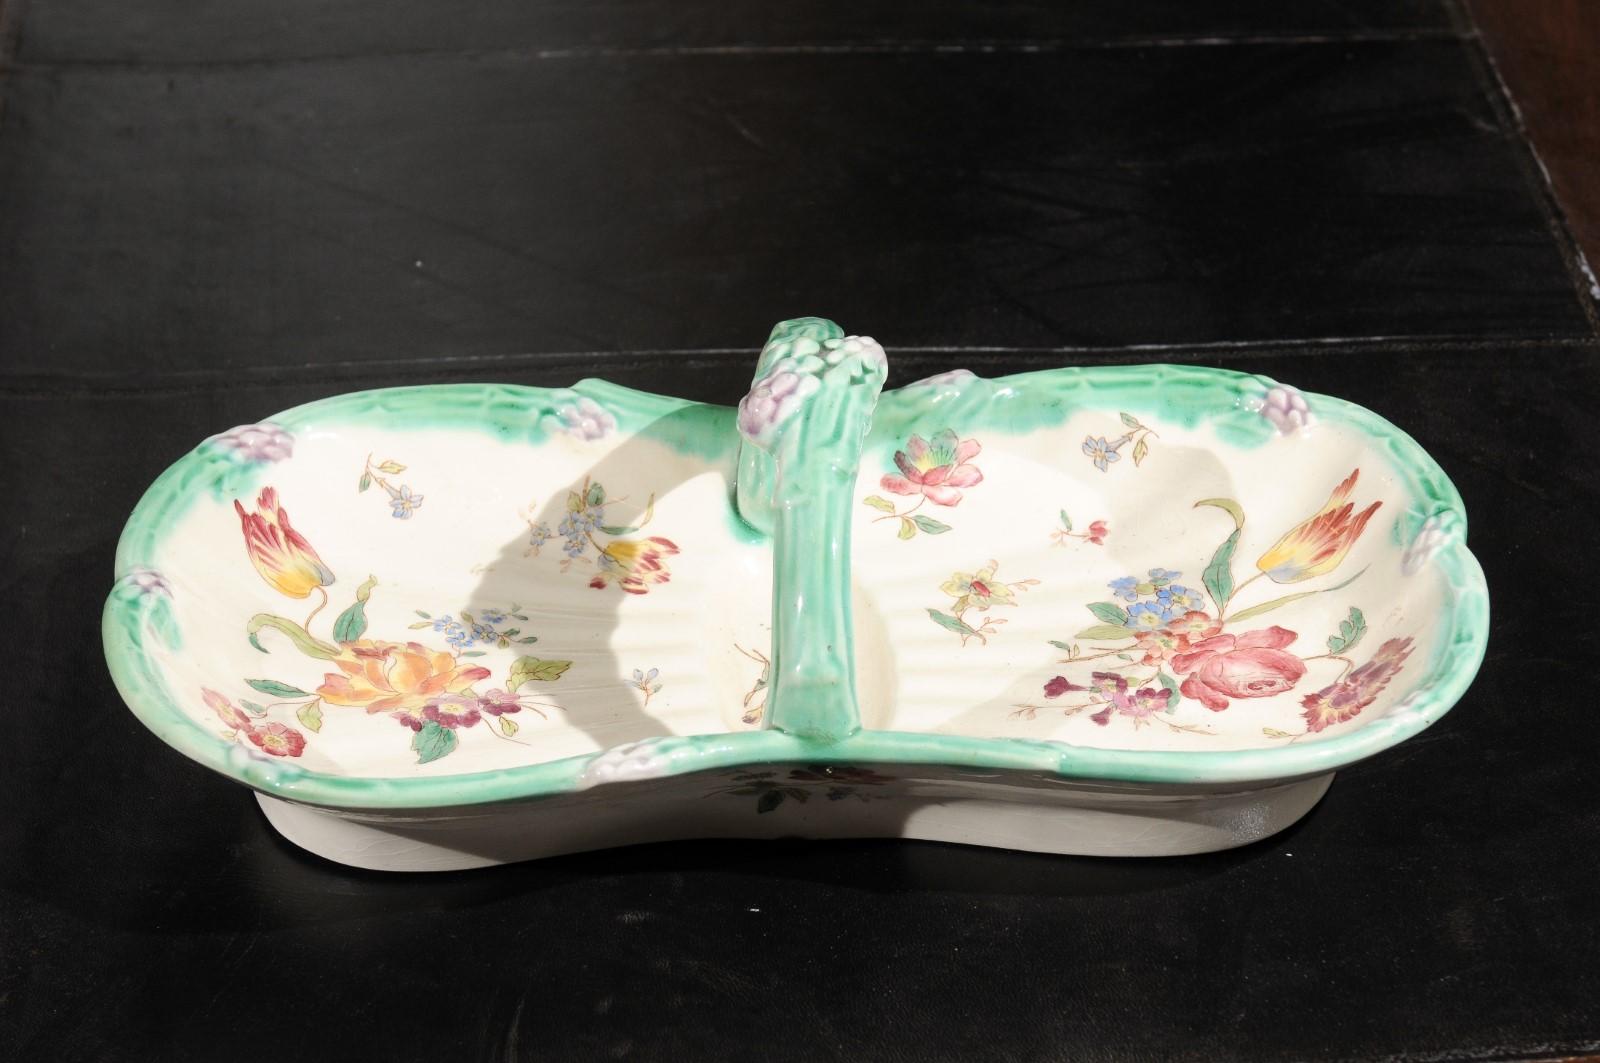 French 19th Century Longchamp Majolica Asparagus Server with Floral Decor For Sale 4